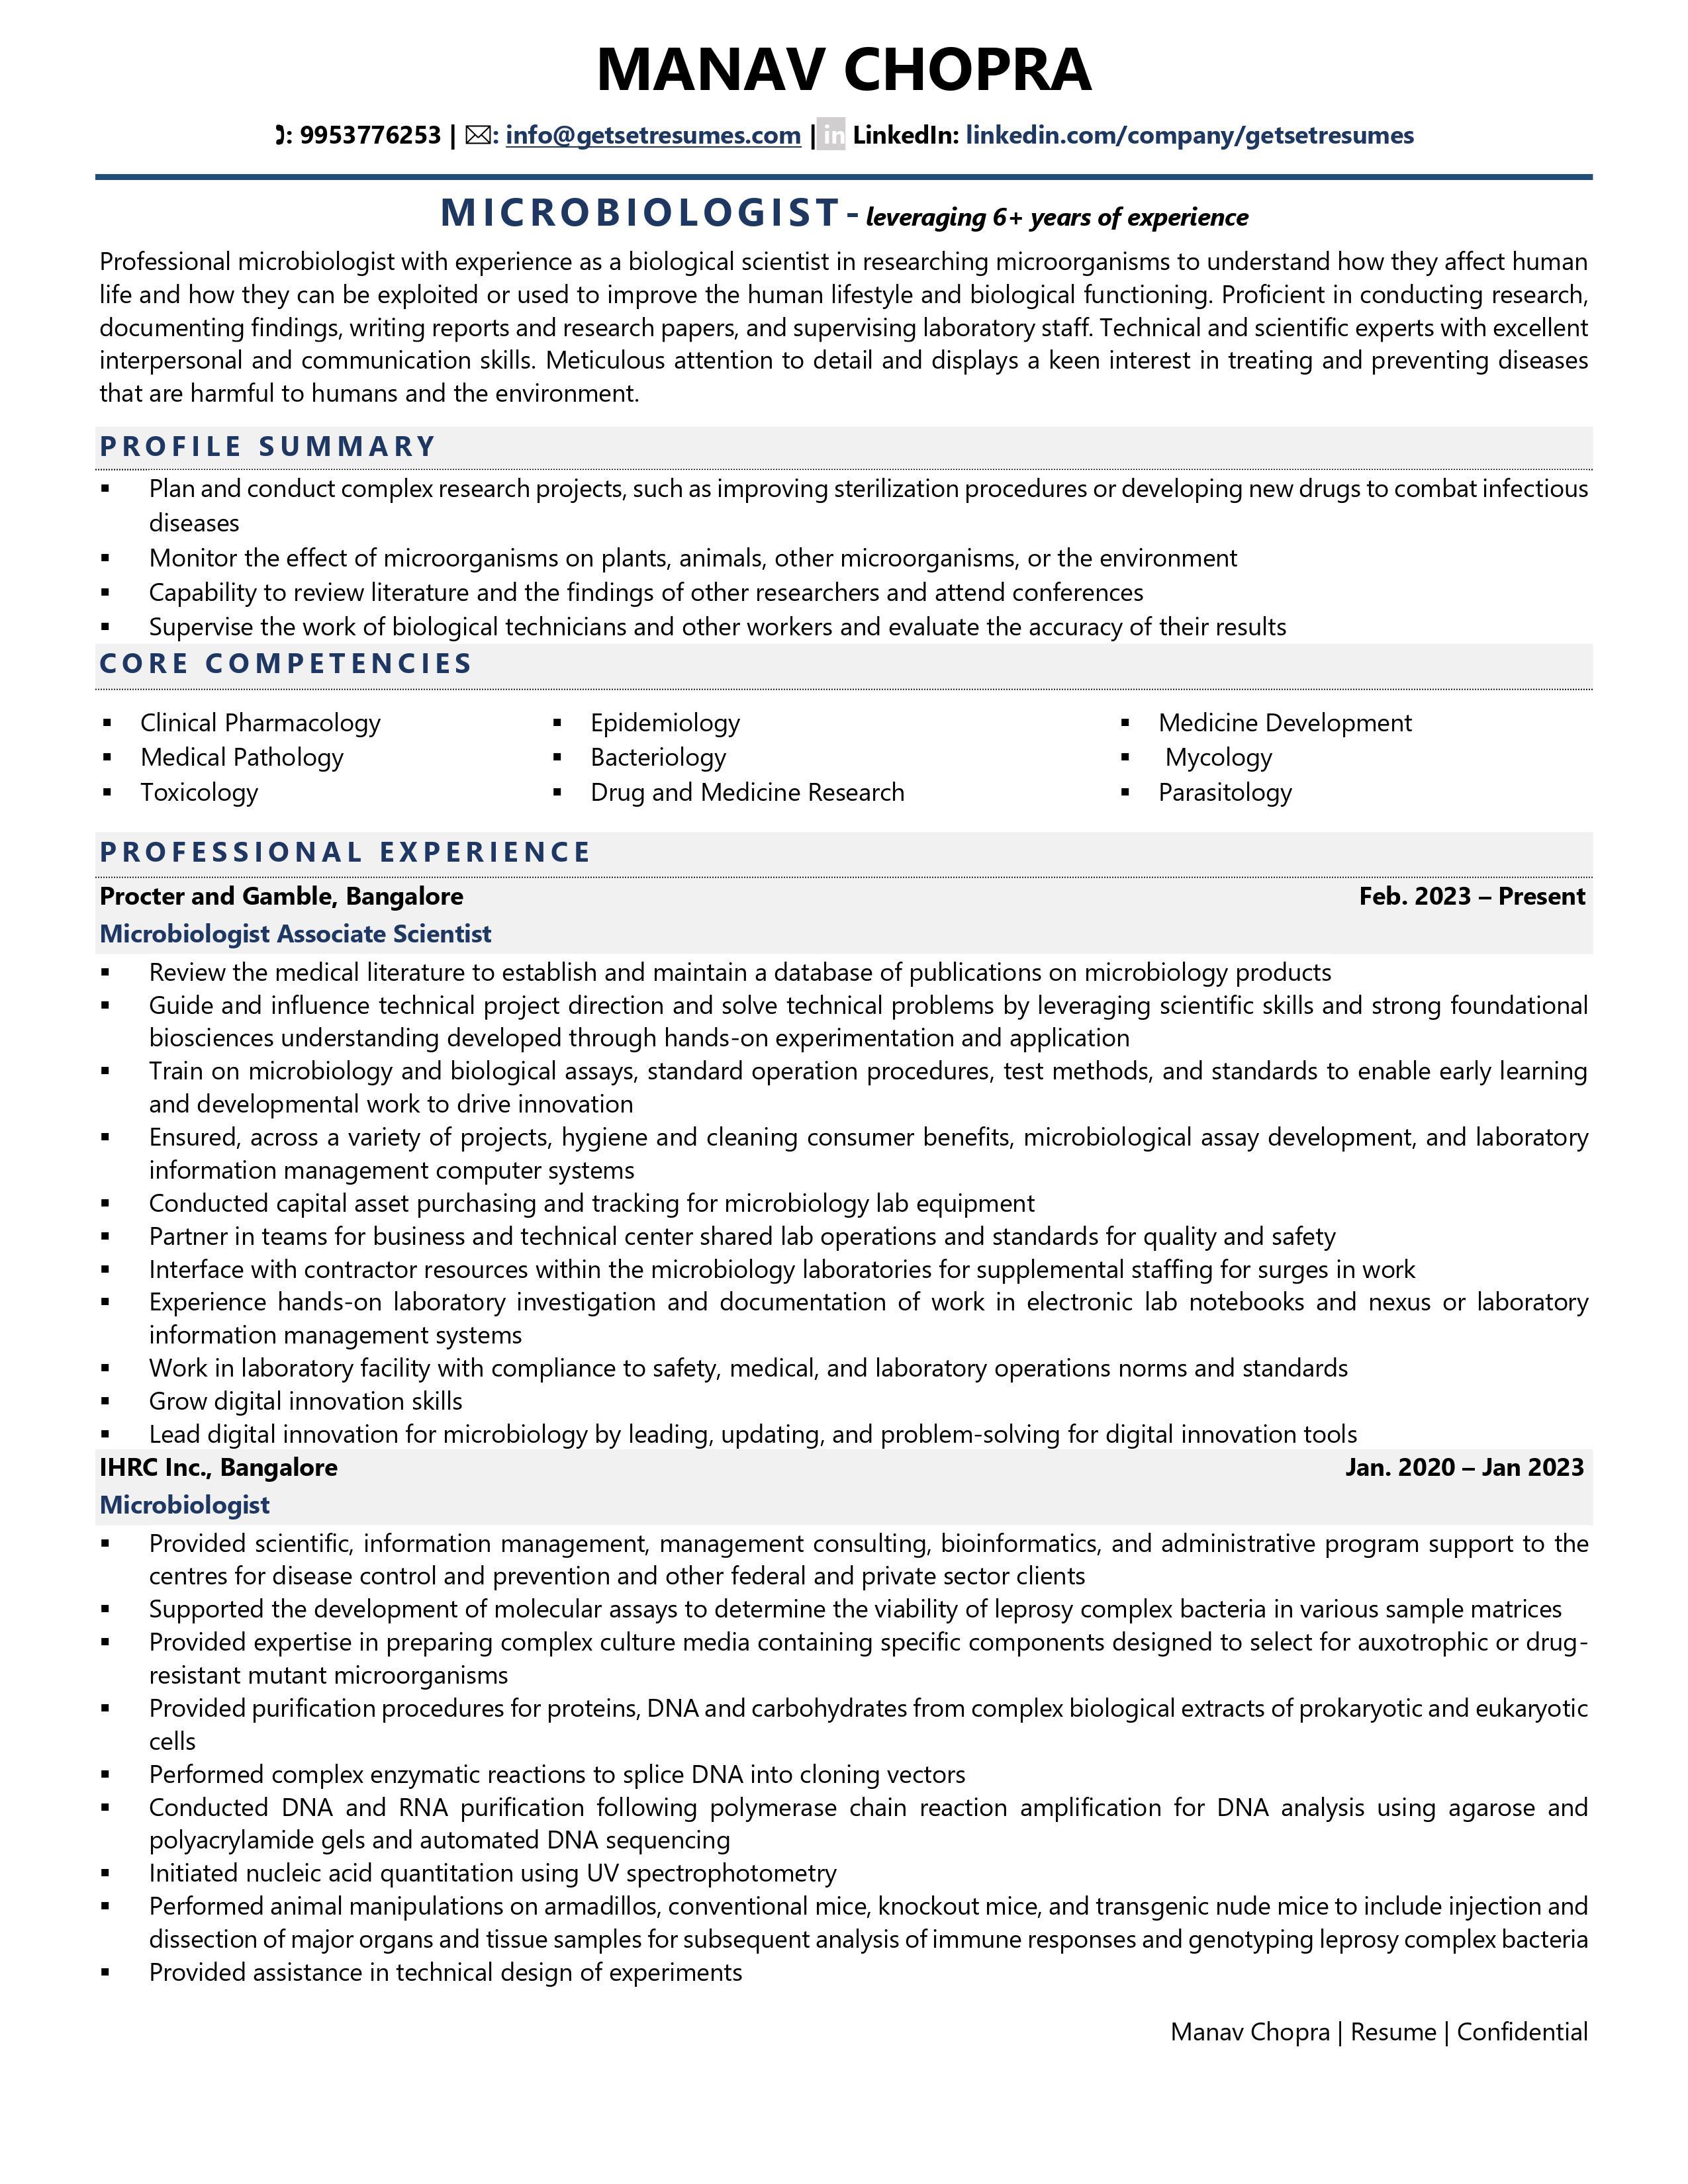 Microbiologist - Resume Example & Template